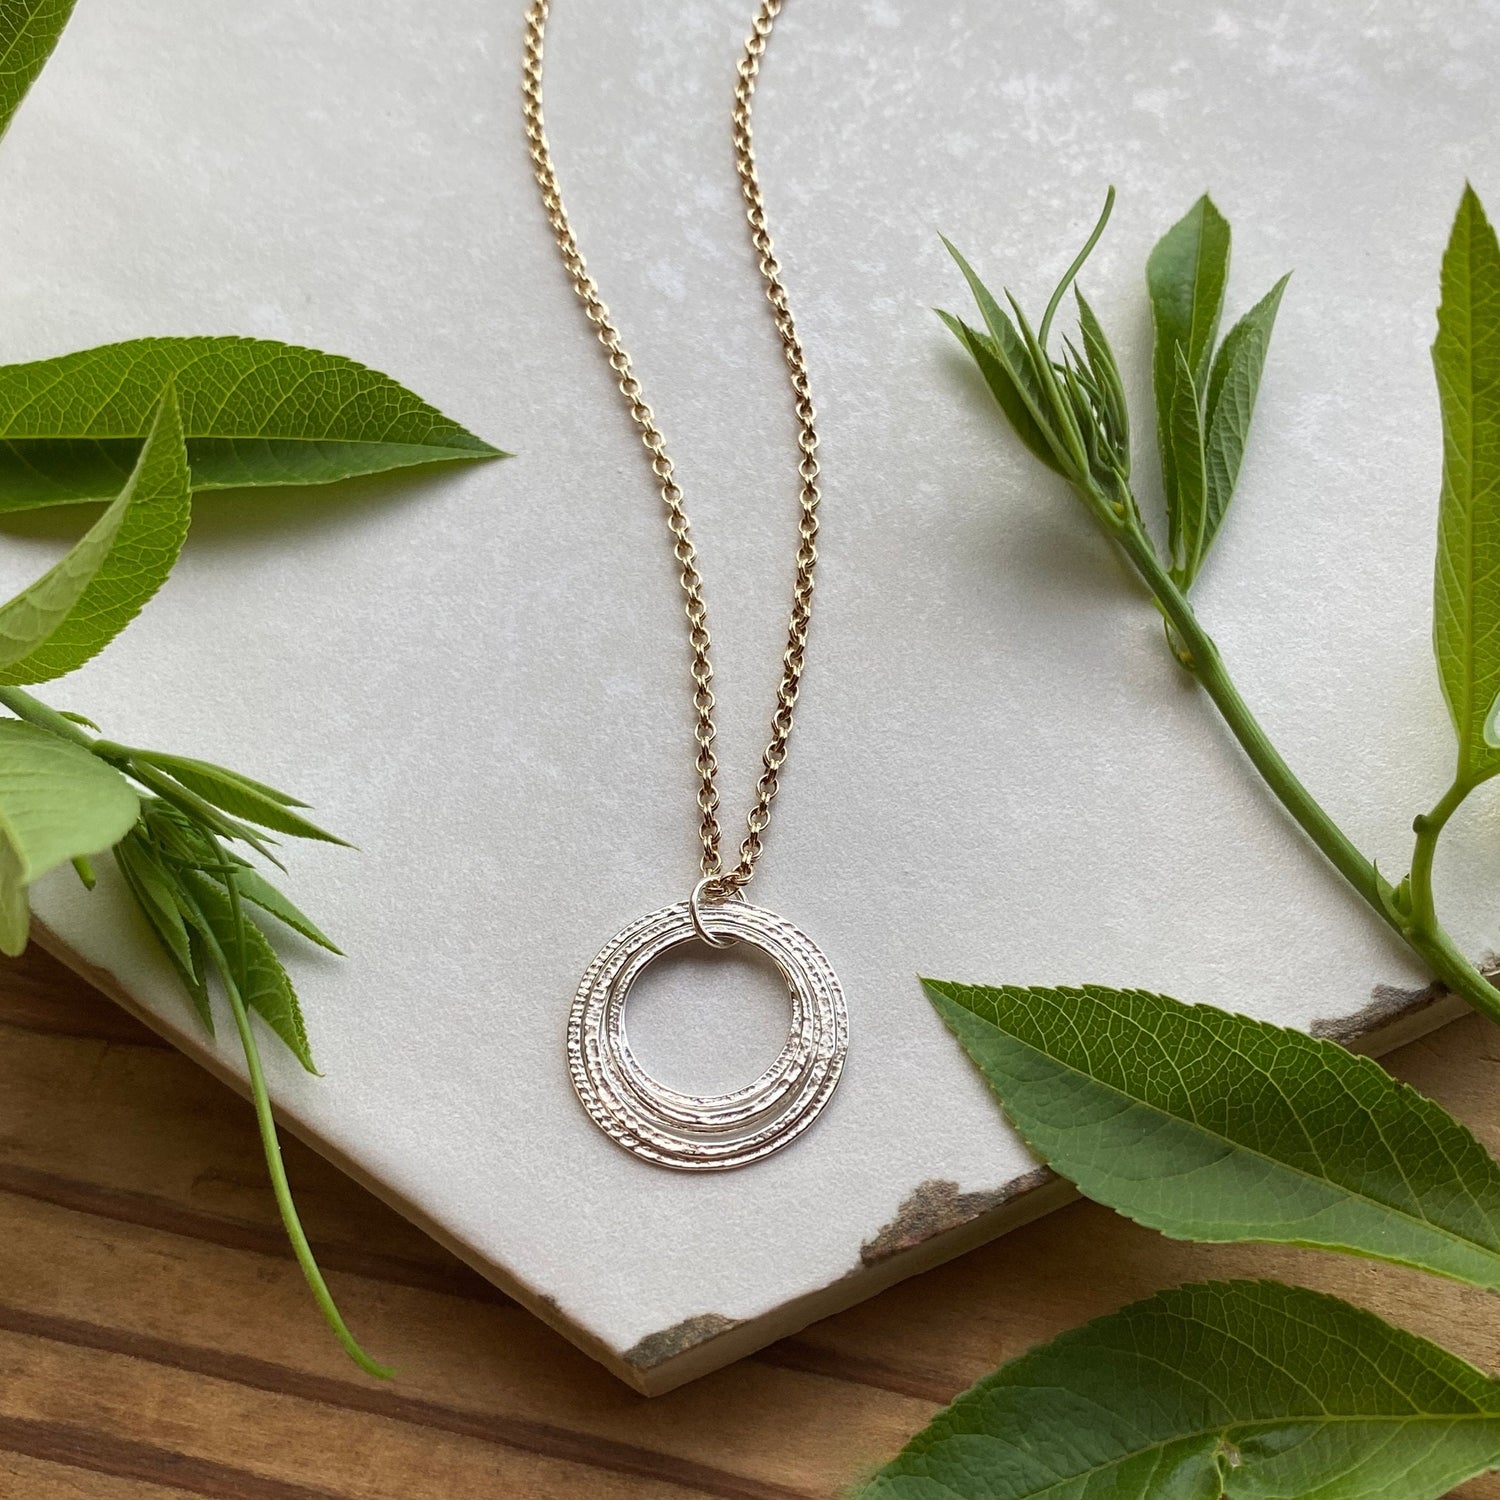 Five Circle 50th Minimalist Mixed Metal Milestone Birthday Necklace, 5 Rings for 5 Decades Handcrafted Perfectly Imperfect 5 Circle Pendant